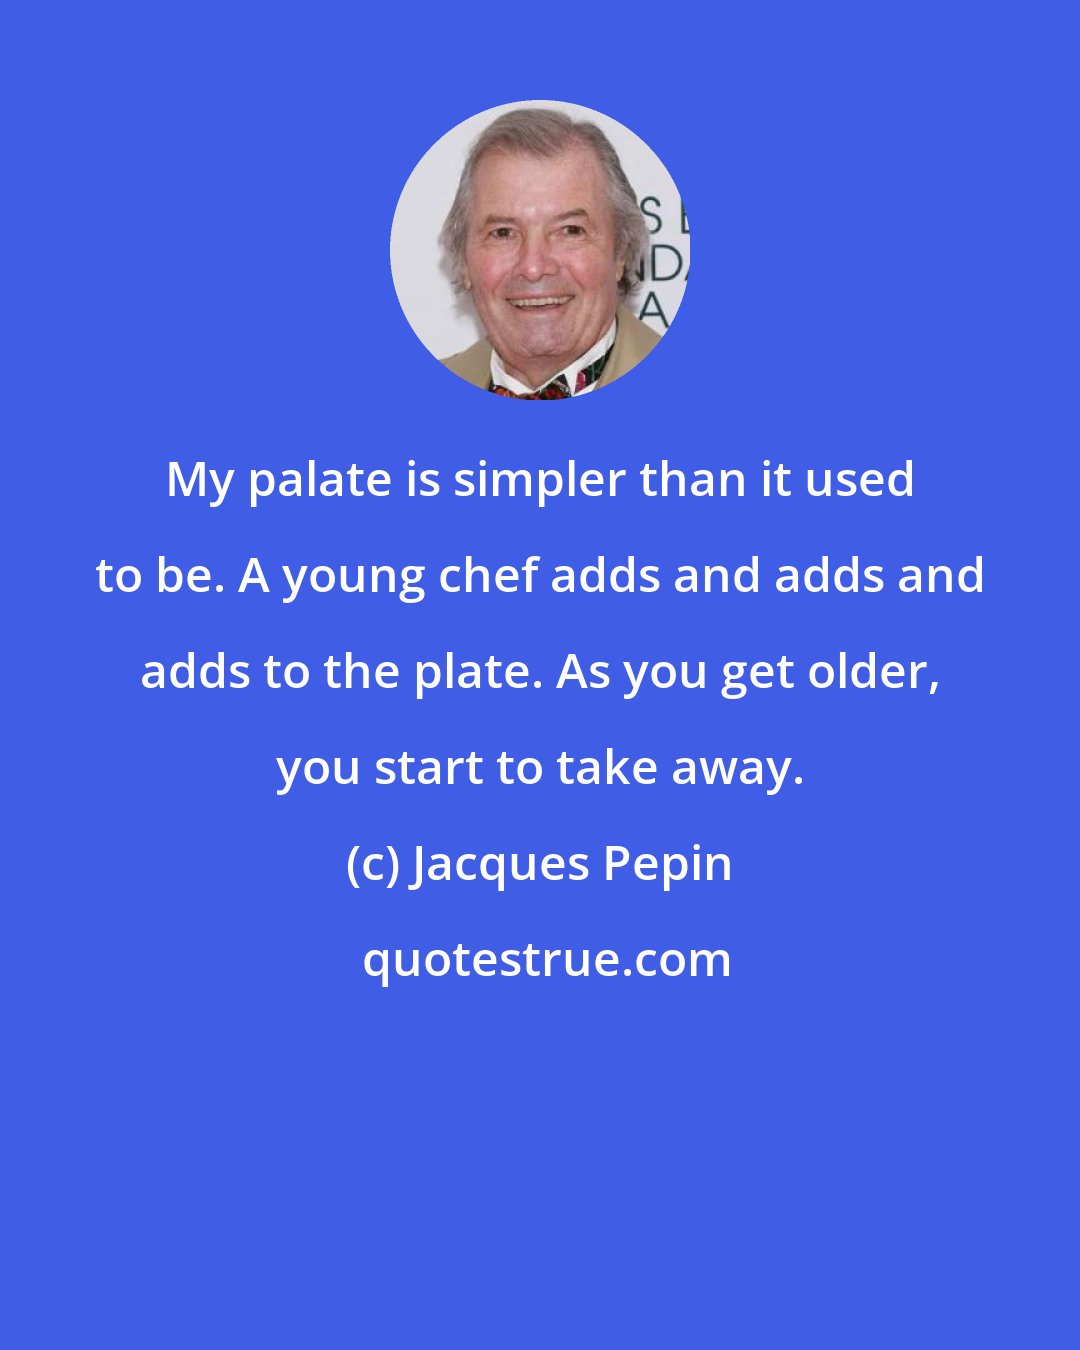 Jacques Pepin: My palate is simpler than it used to be. A young chef adds and adds and adds to the plate. As you get older, you start to take away.